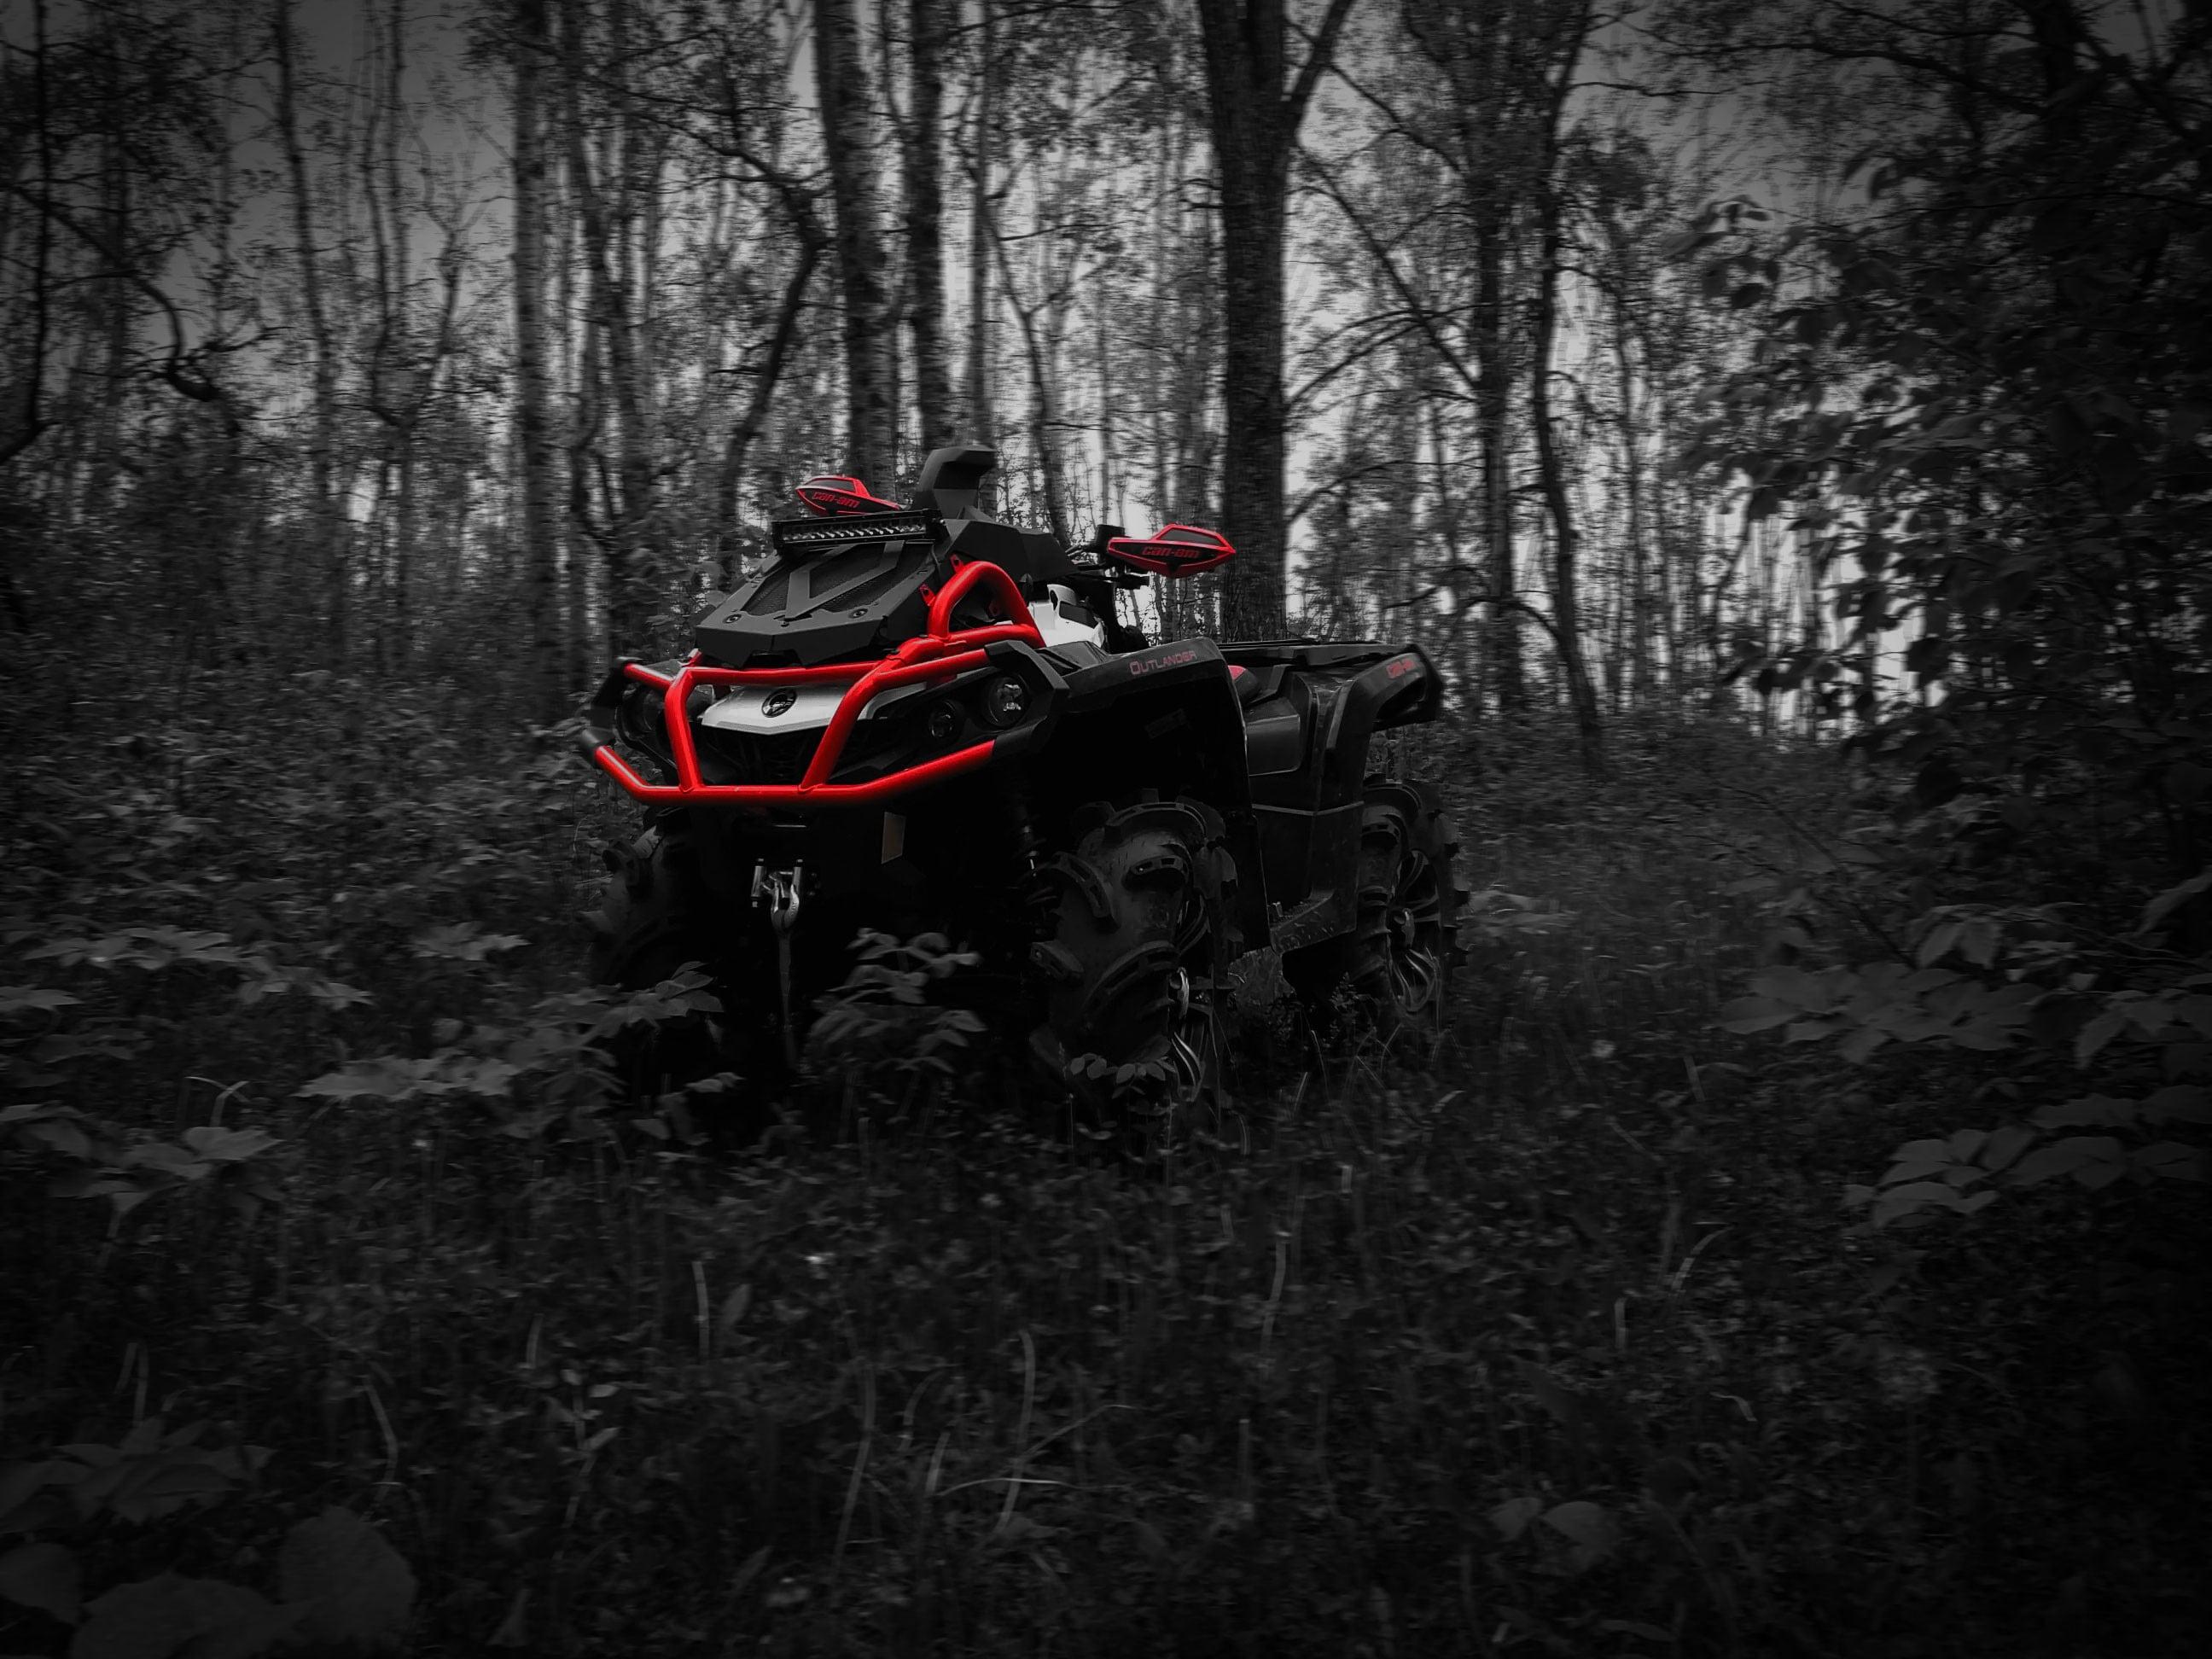 BRP products: off-road vehicles, 3-wheeler, snowmobile, personal watercraft